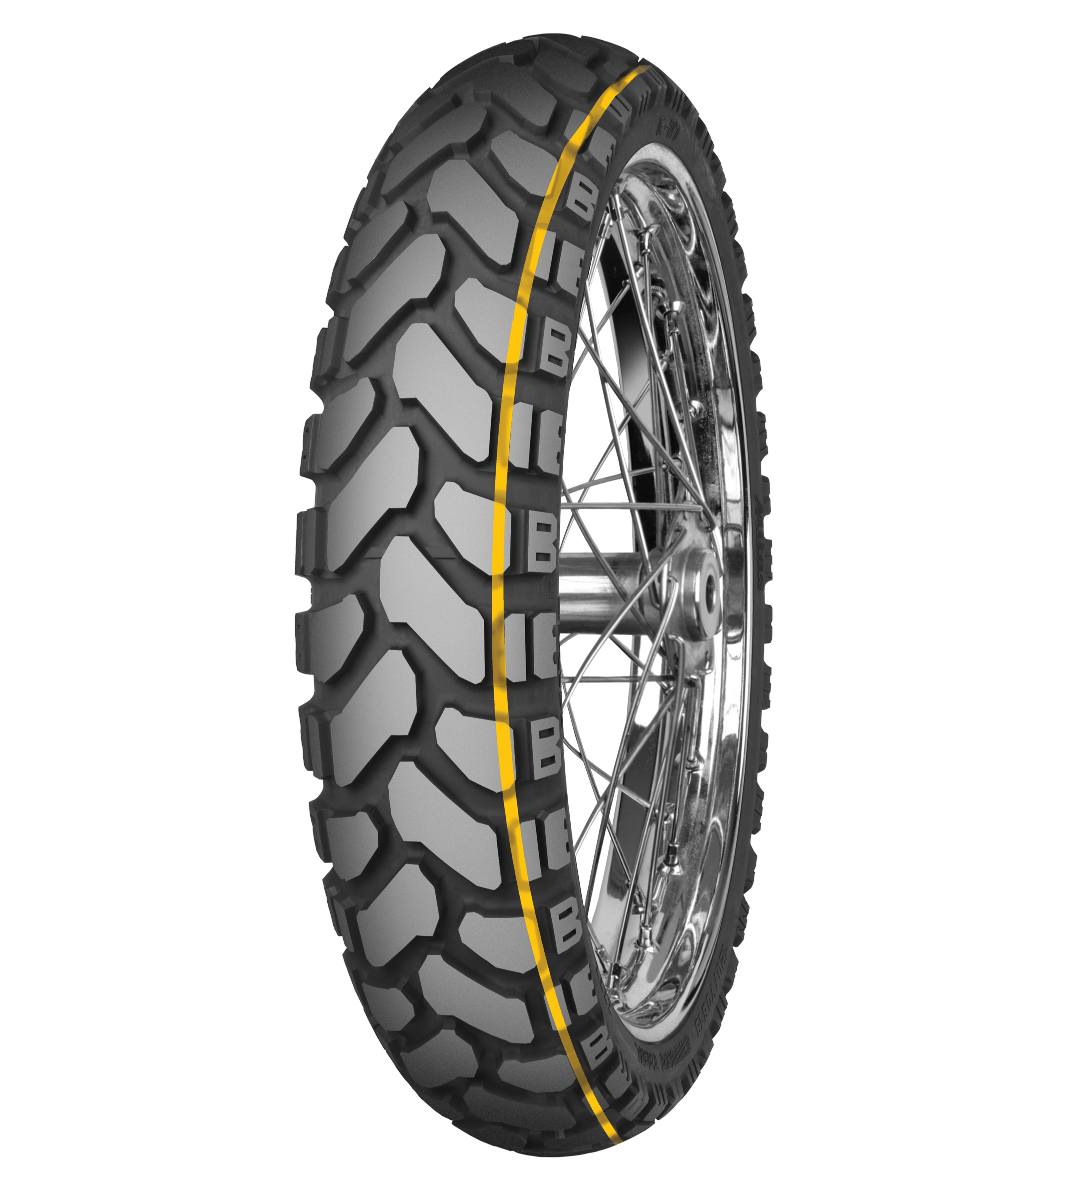 Mitas E-07+ ENDURO TRAIL 90/90B21 Trail ON Trail DAKAR 54T Yellow Tubeless Front Tire, 224657, 90/90B21, Adventure Touring, E Series, E-07+ Enduro Trail, Front, Trail, Trail ON, Tires - Imported and distributed in North & South America by Lindeco Genuine Powersports - Premier Powersports Equipment and Accessories for Motorcycle Enthusiasts, Professional Riders and Dealers.